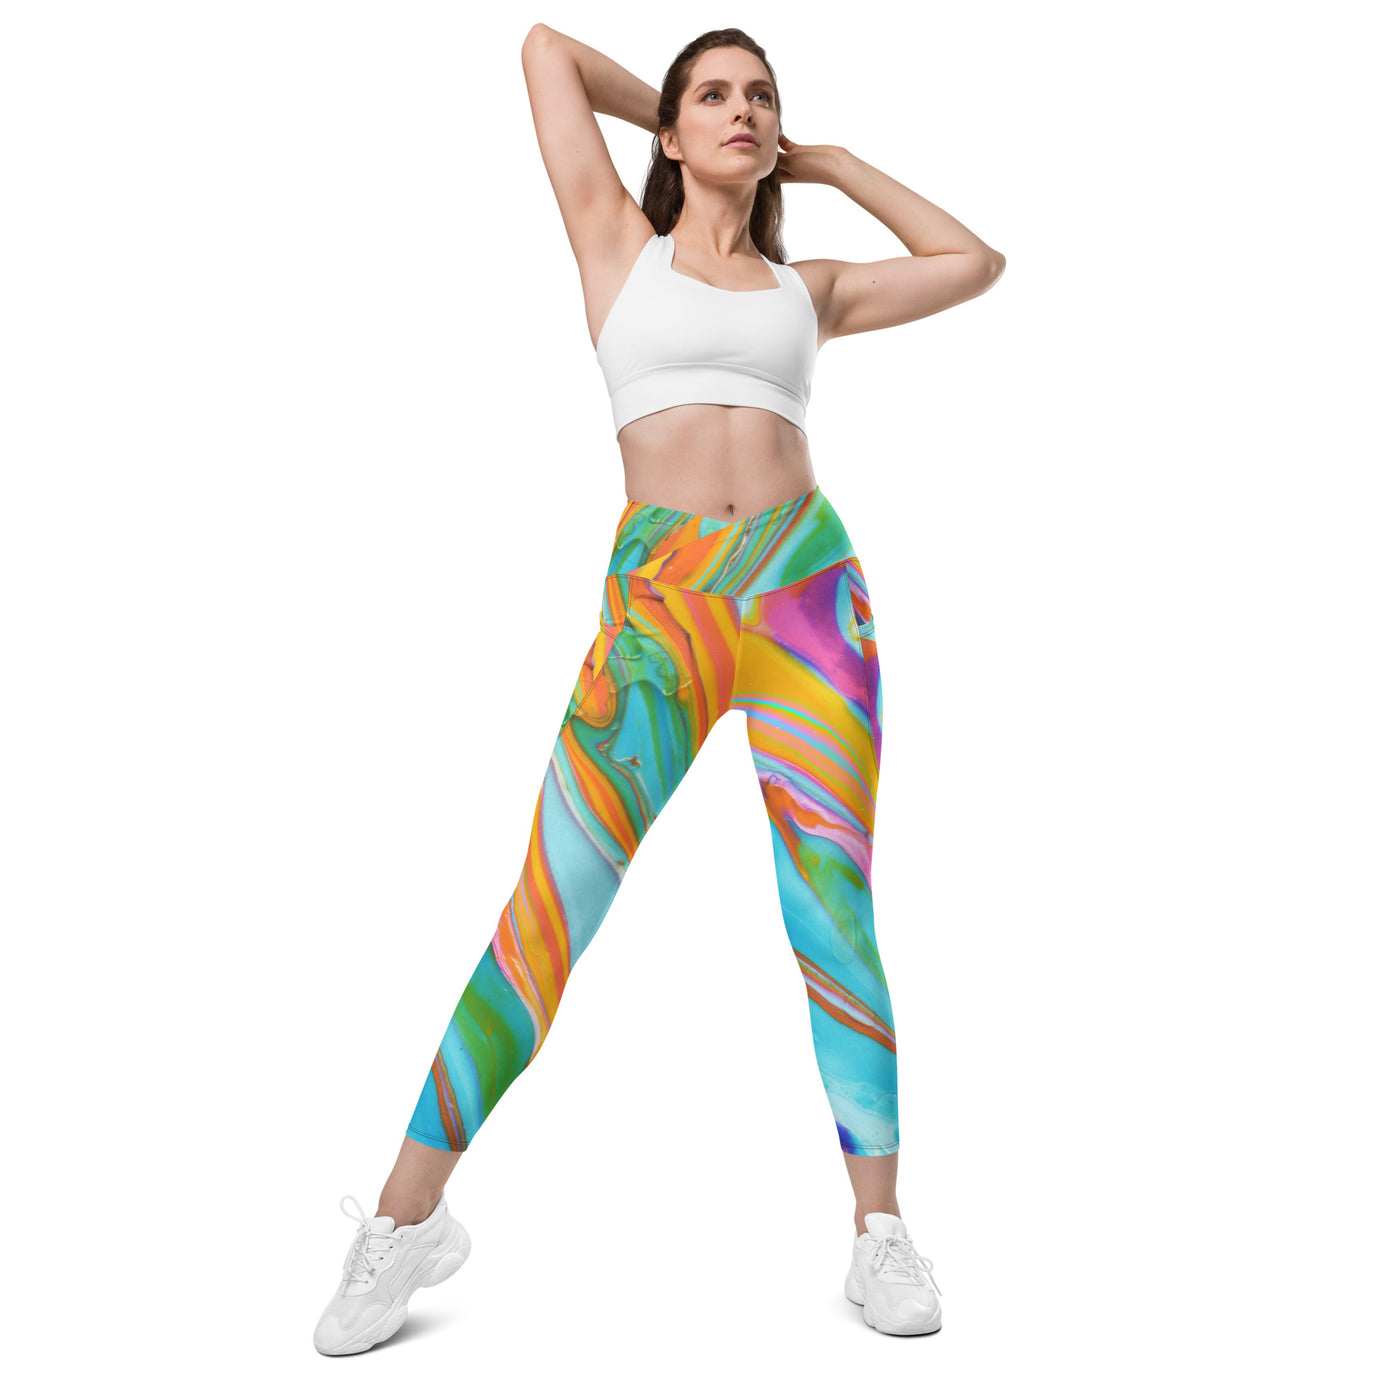 Jester Crossover leggings with pockets